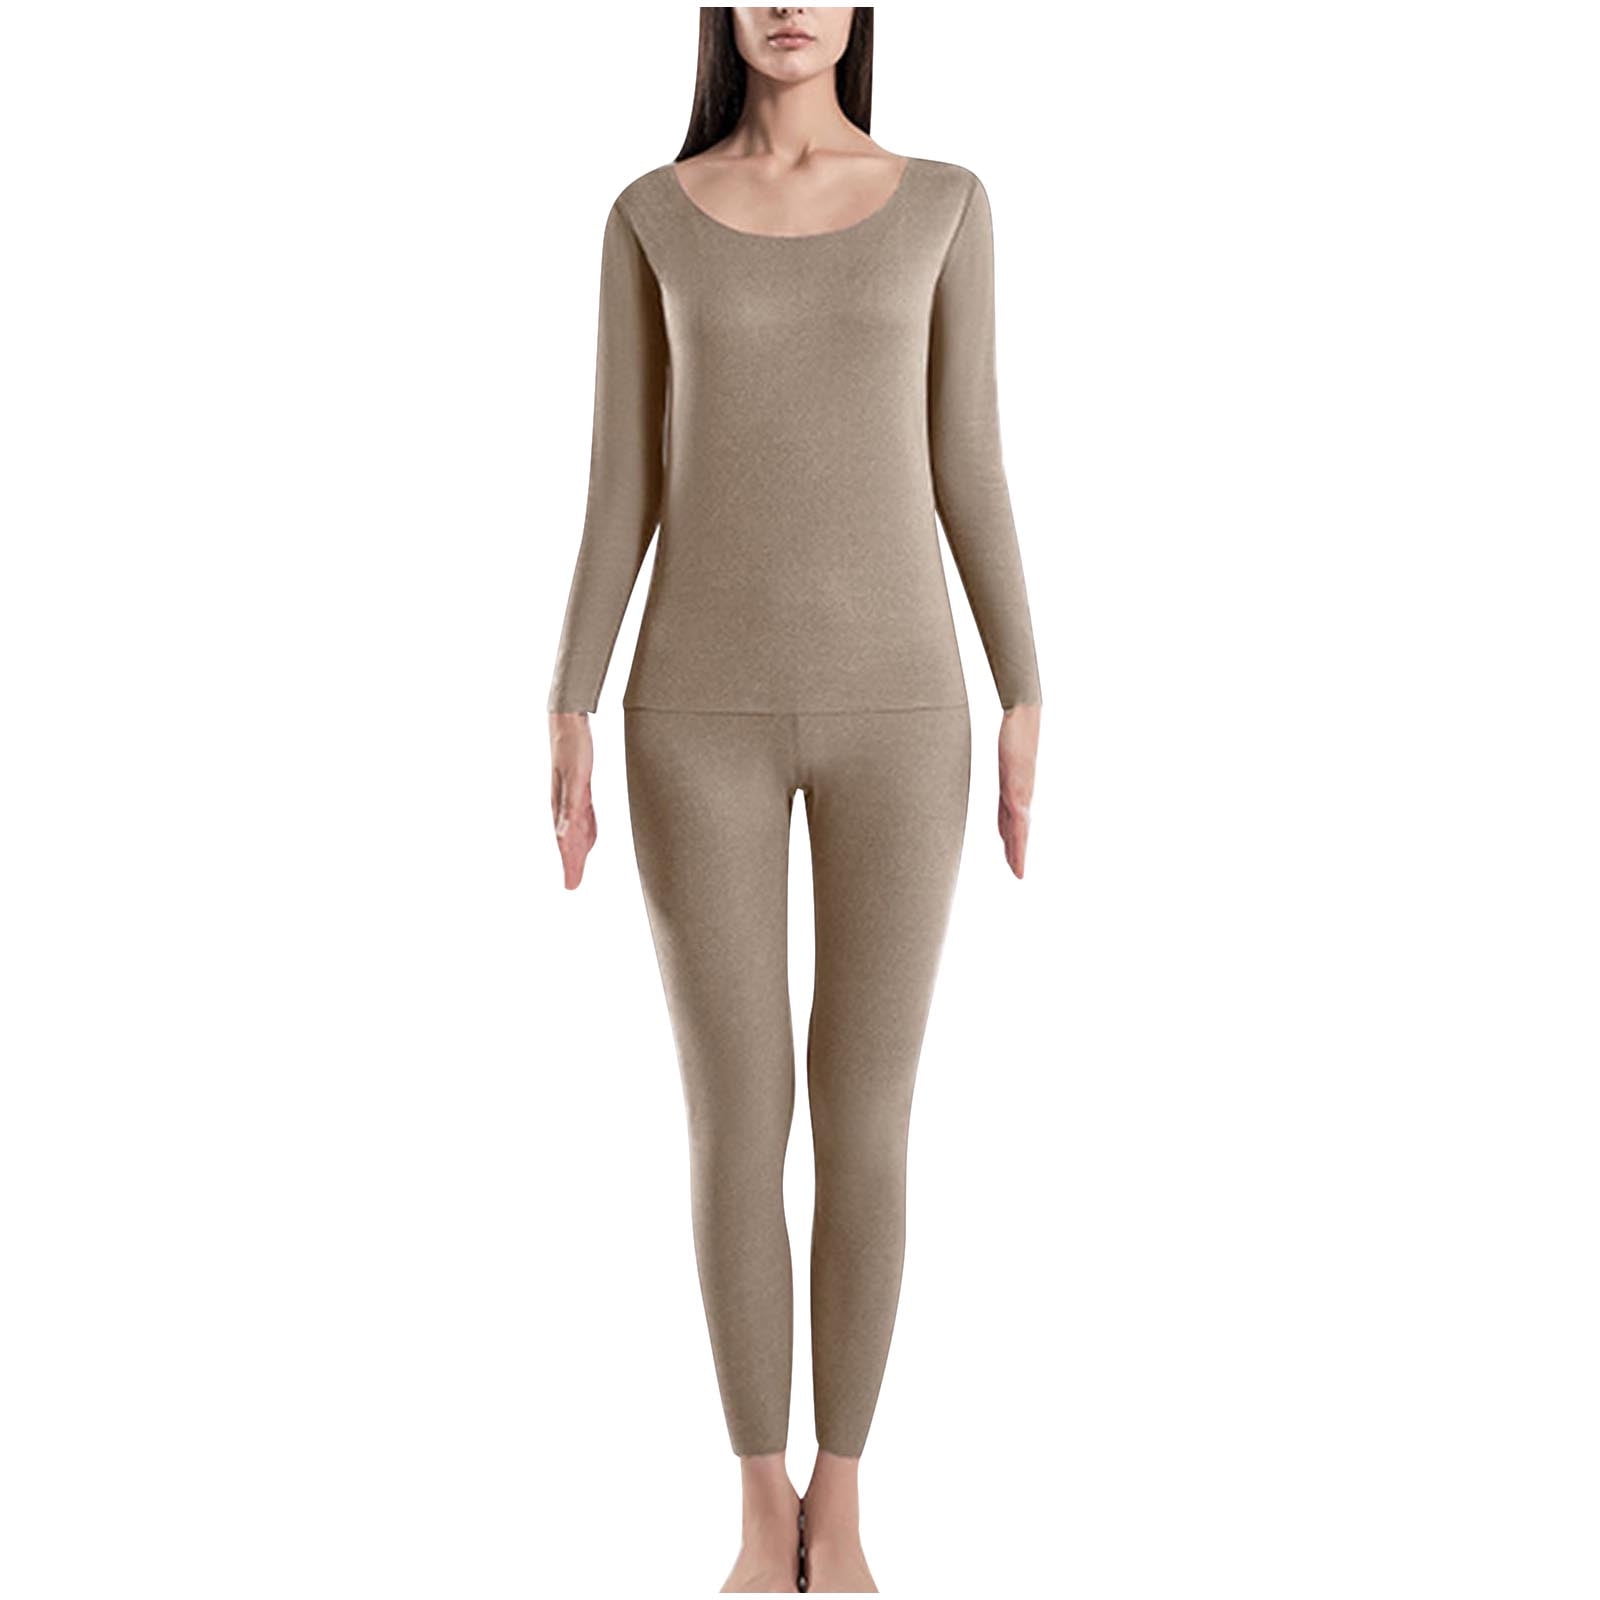 Merdia Thermal Underwear Long Johns Base Layer for Women Stretch Soft Thermal  Top and Bottom Set Medium Size with Light Beige color at  Women's  Clothing store